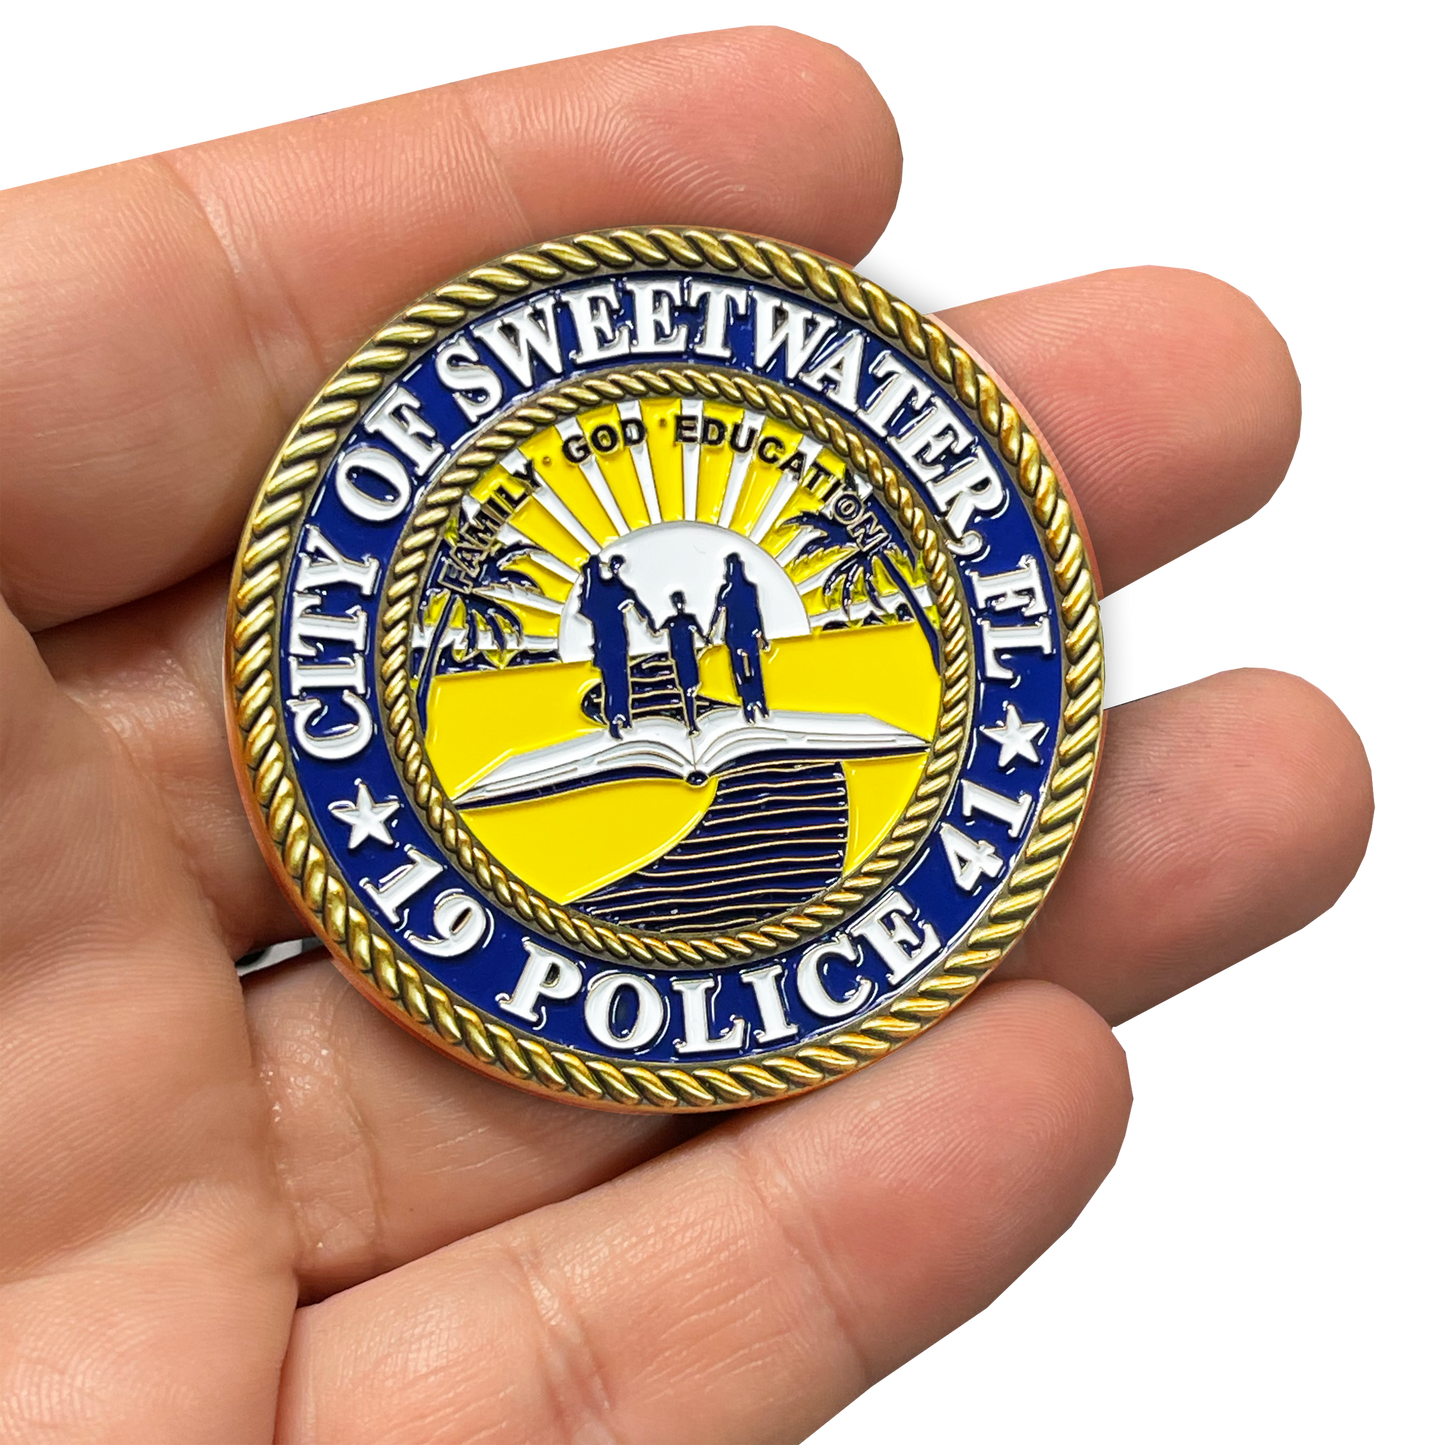 EL8-02 Sweetwater Police Department Miami Florida Challenge Coin Sweet Water